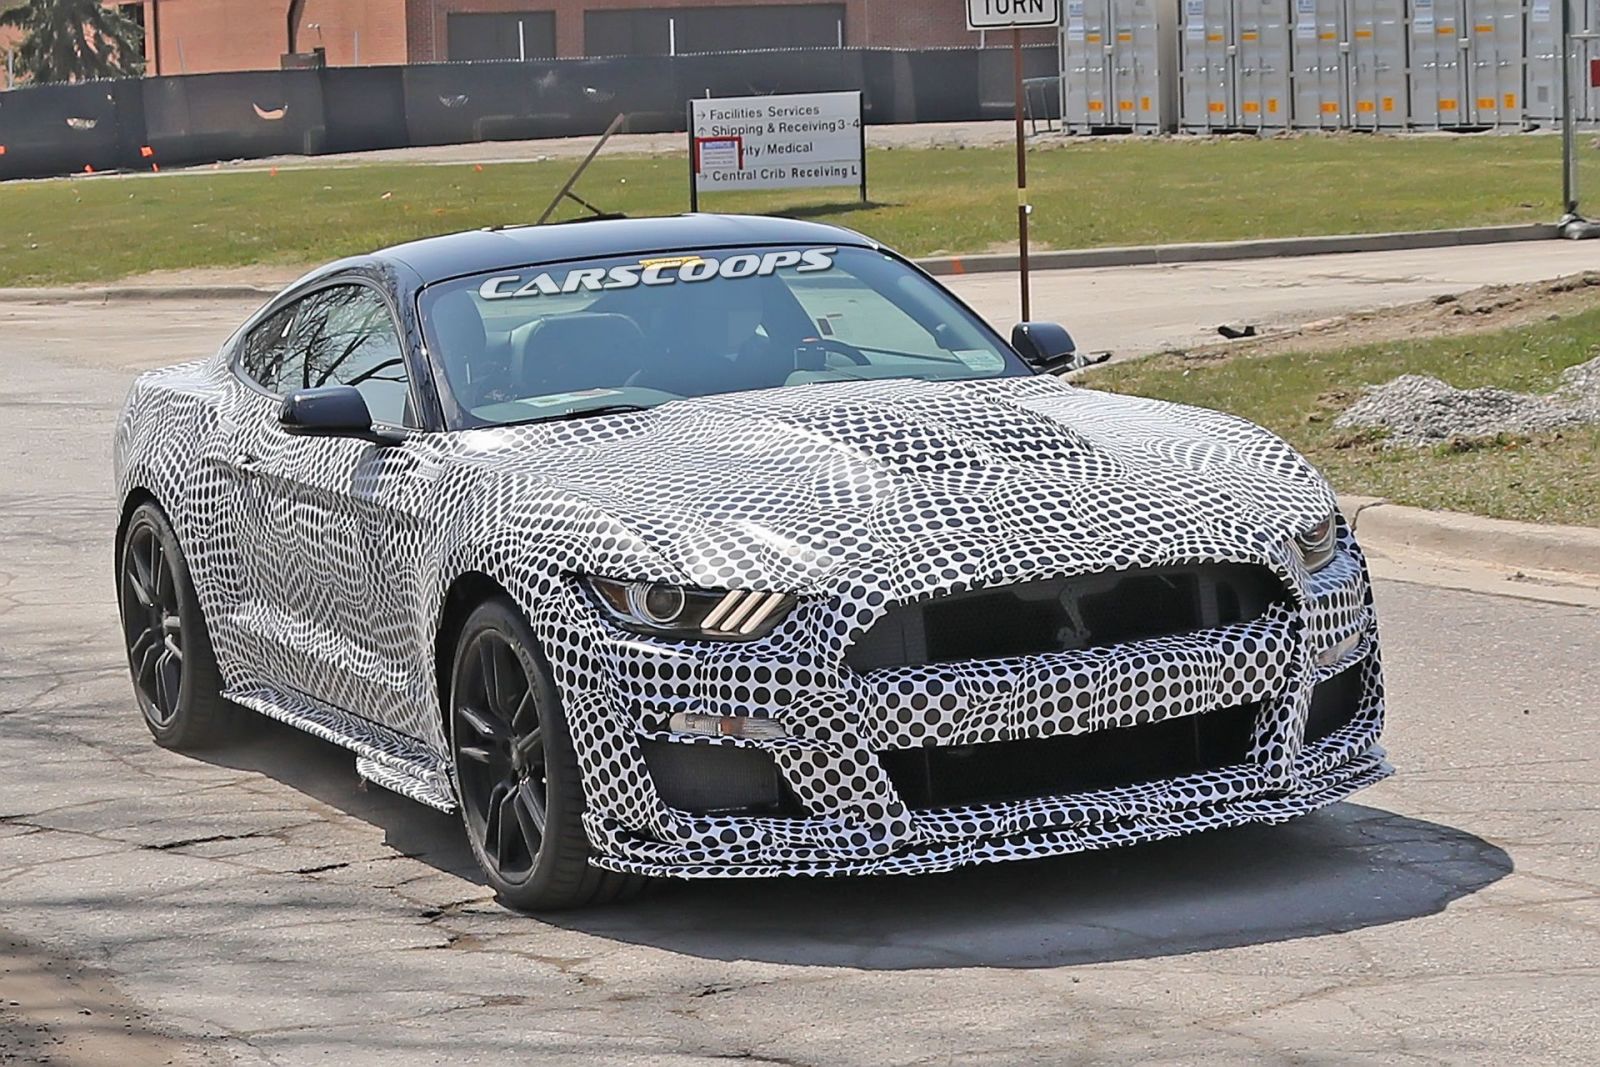 Illustration for article titled So looks like the 2020 Mustang GT500 specs were leaked. What do you think? Too good to be true? Just what you expected?em/em